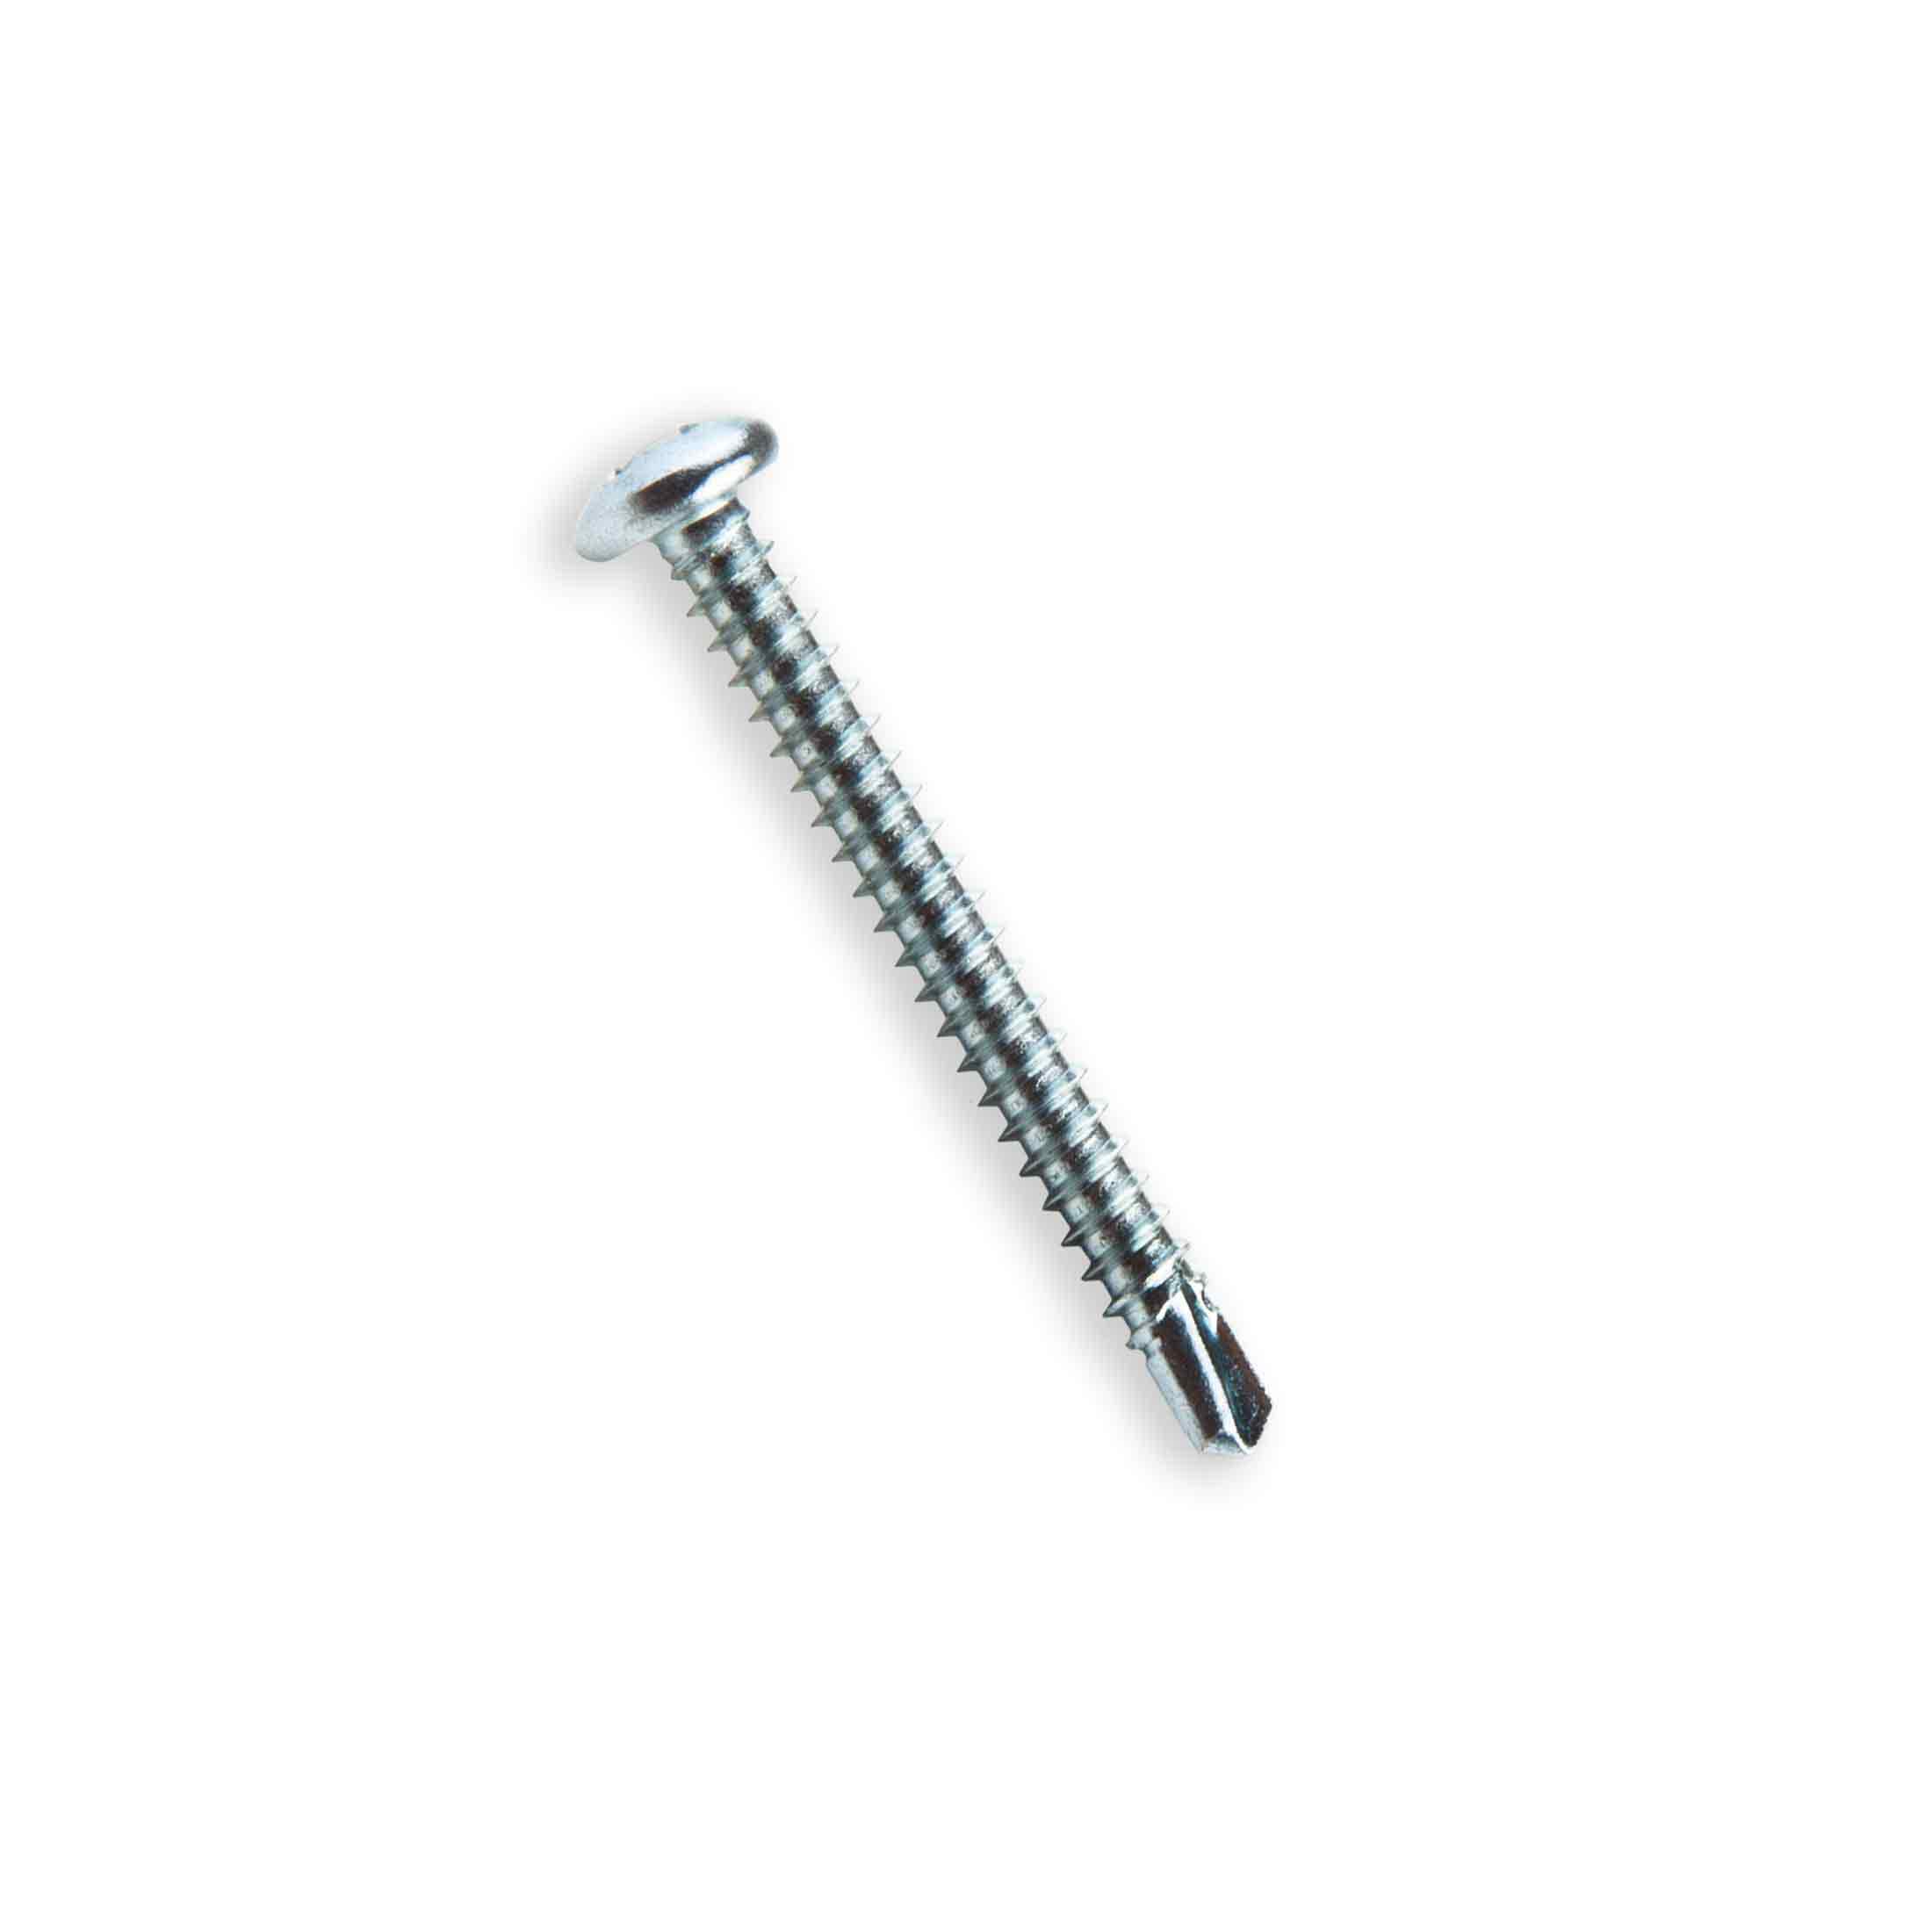 Hillman #10 x 3/4-in Square-Drive Sheet Metal Screws in the Specialty  Screws department at